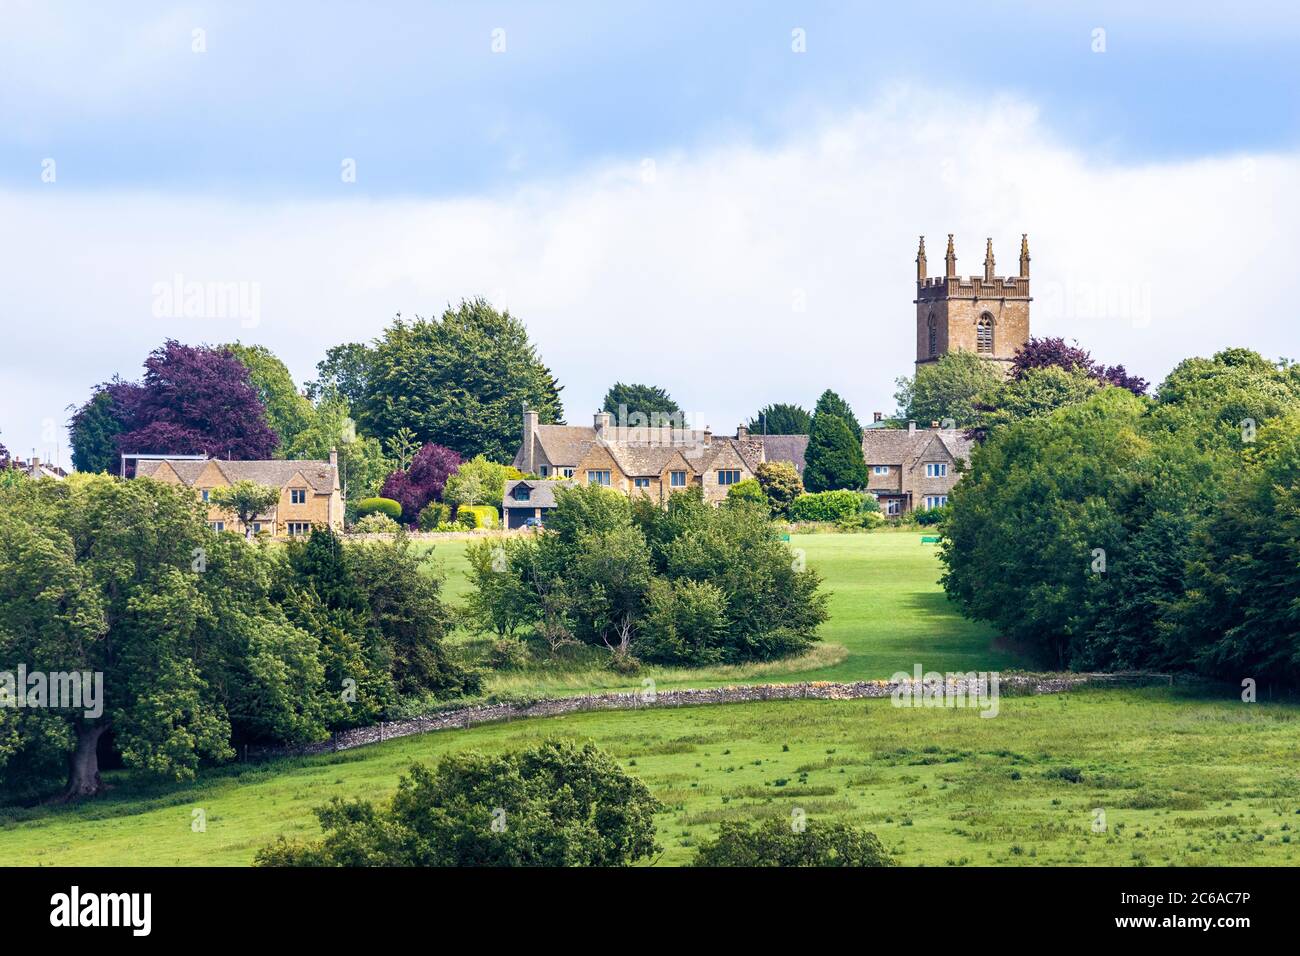 A long shot of the hilltop Cotswold town of Stow on the Wold, Gloucestershire UK Stock Photo